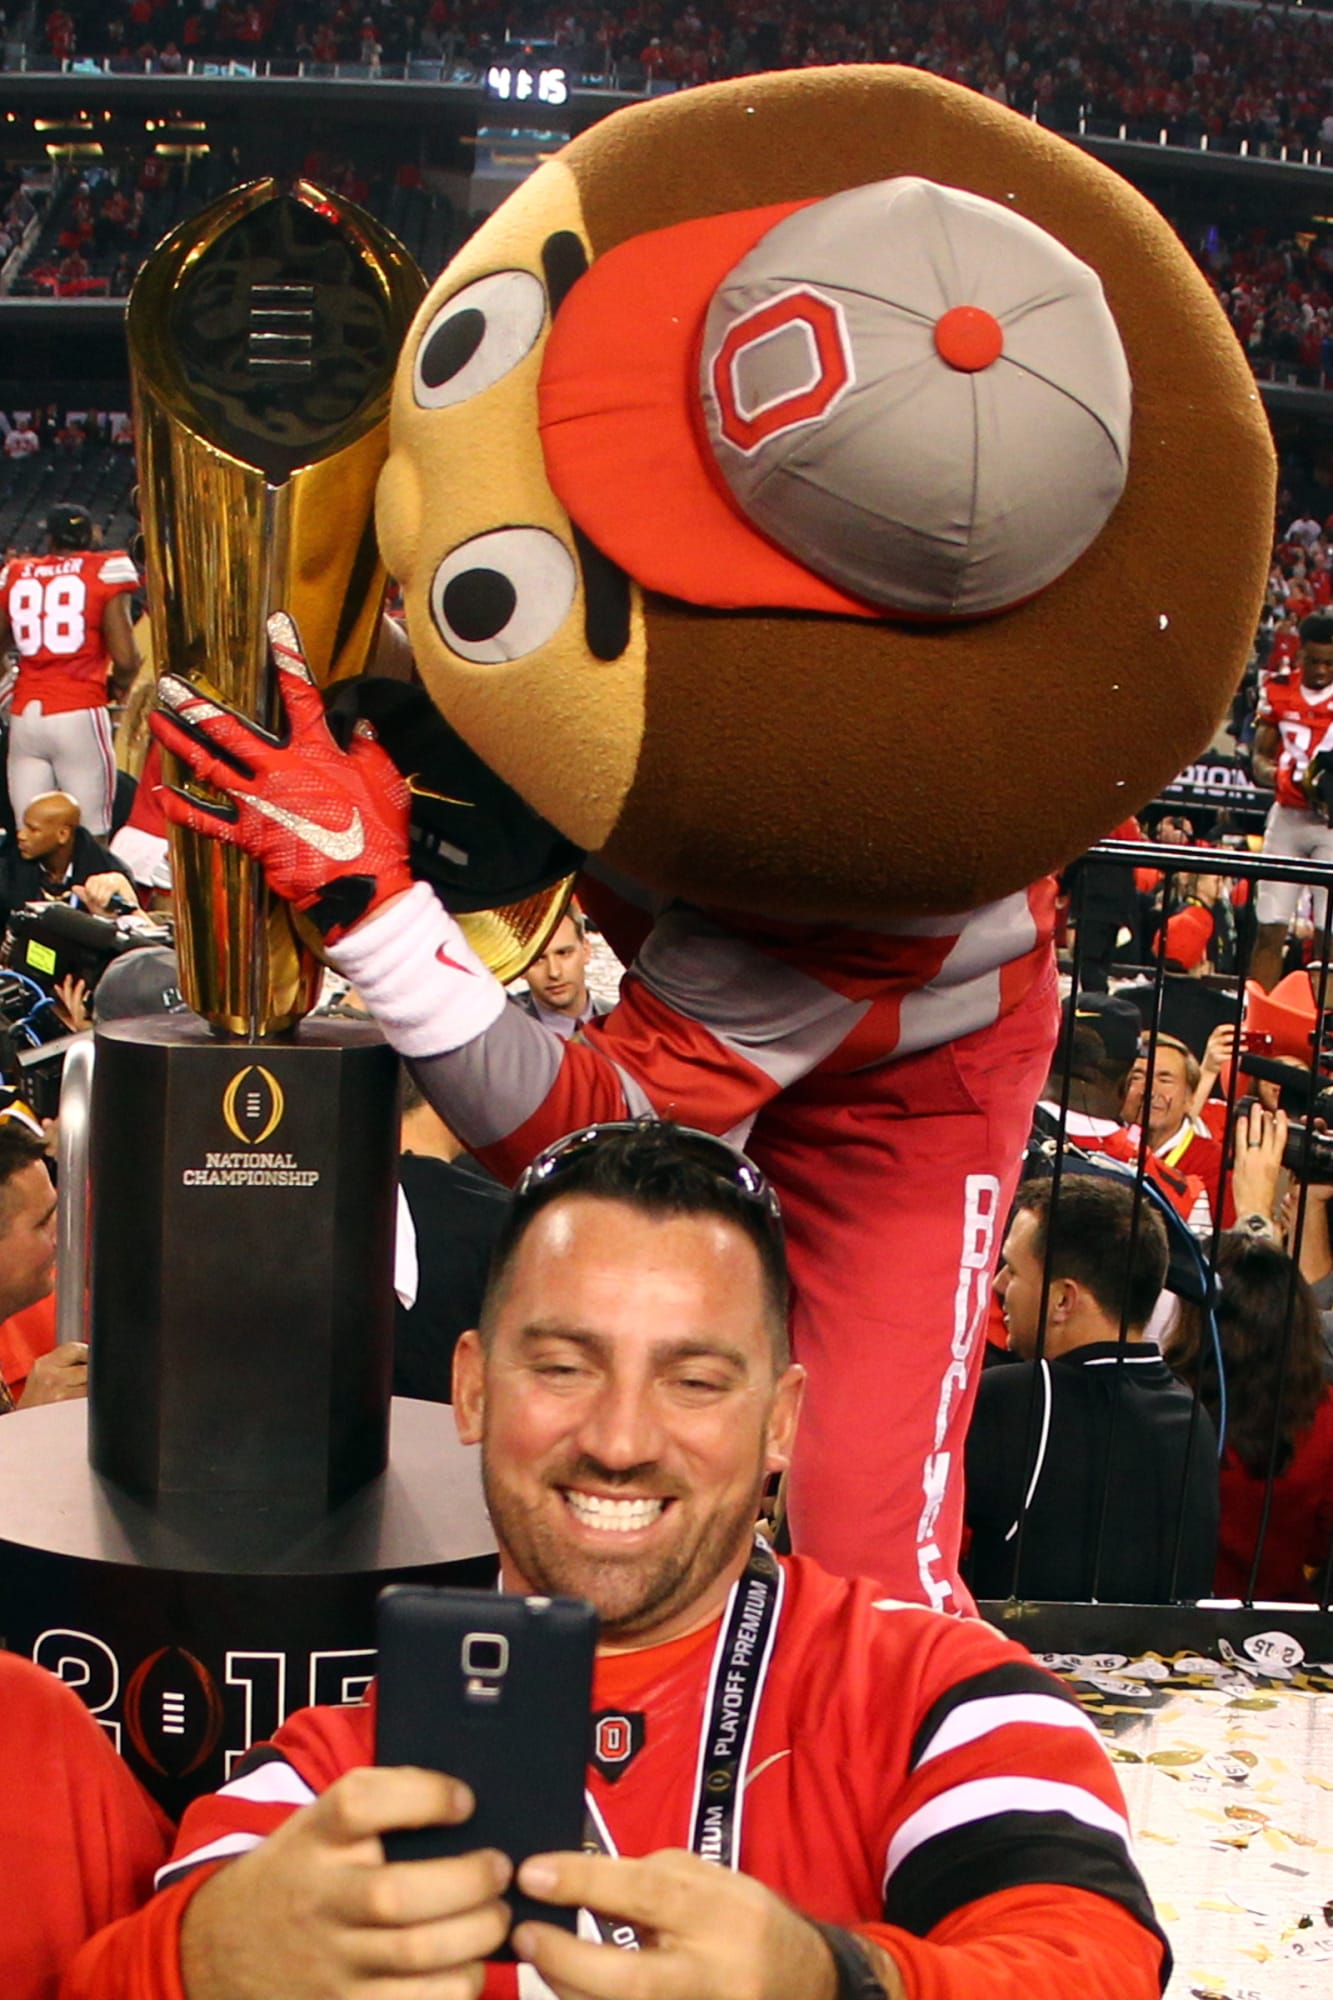 Is the Ohio State football team playing at a National Champion level?